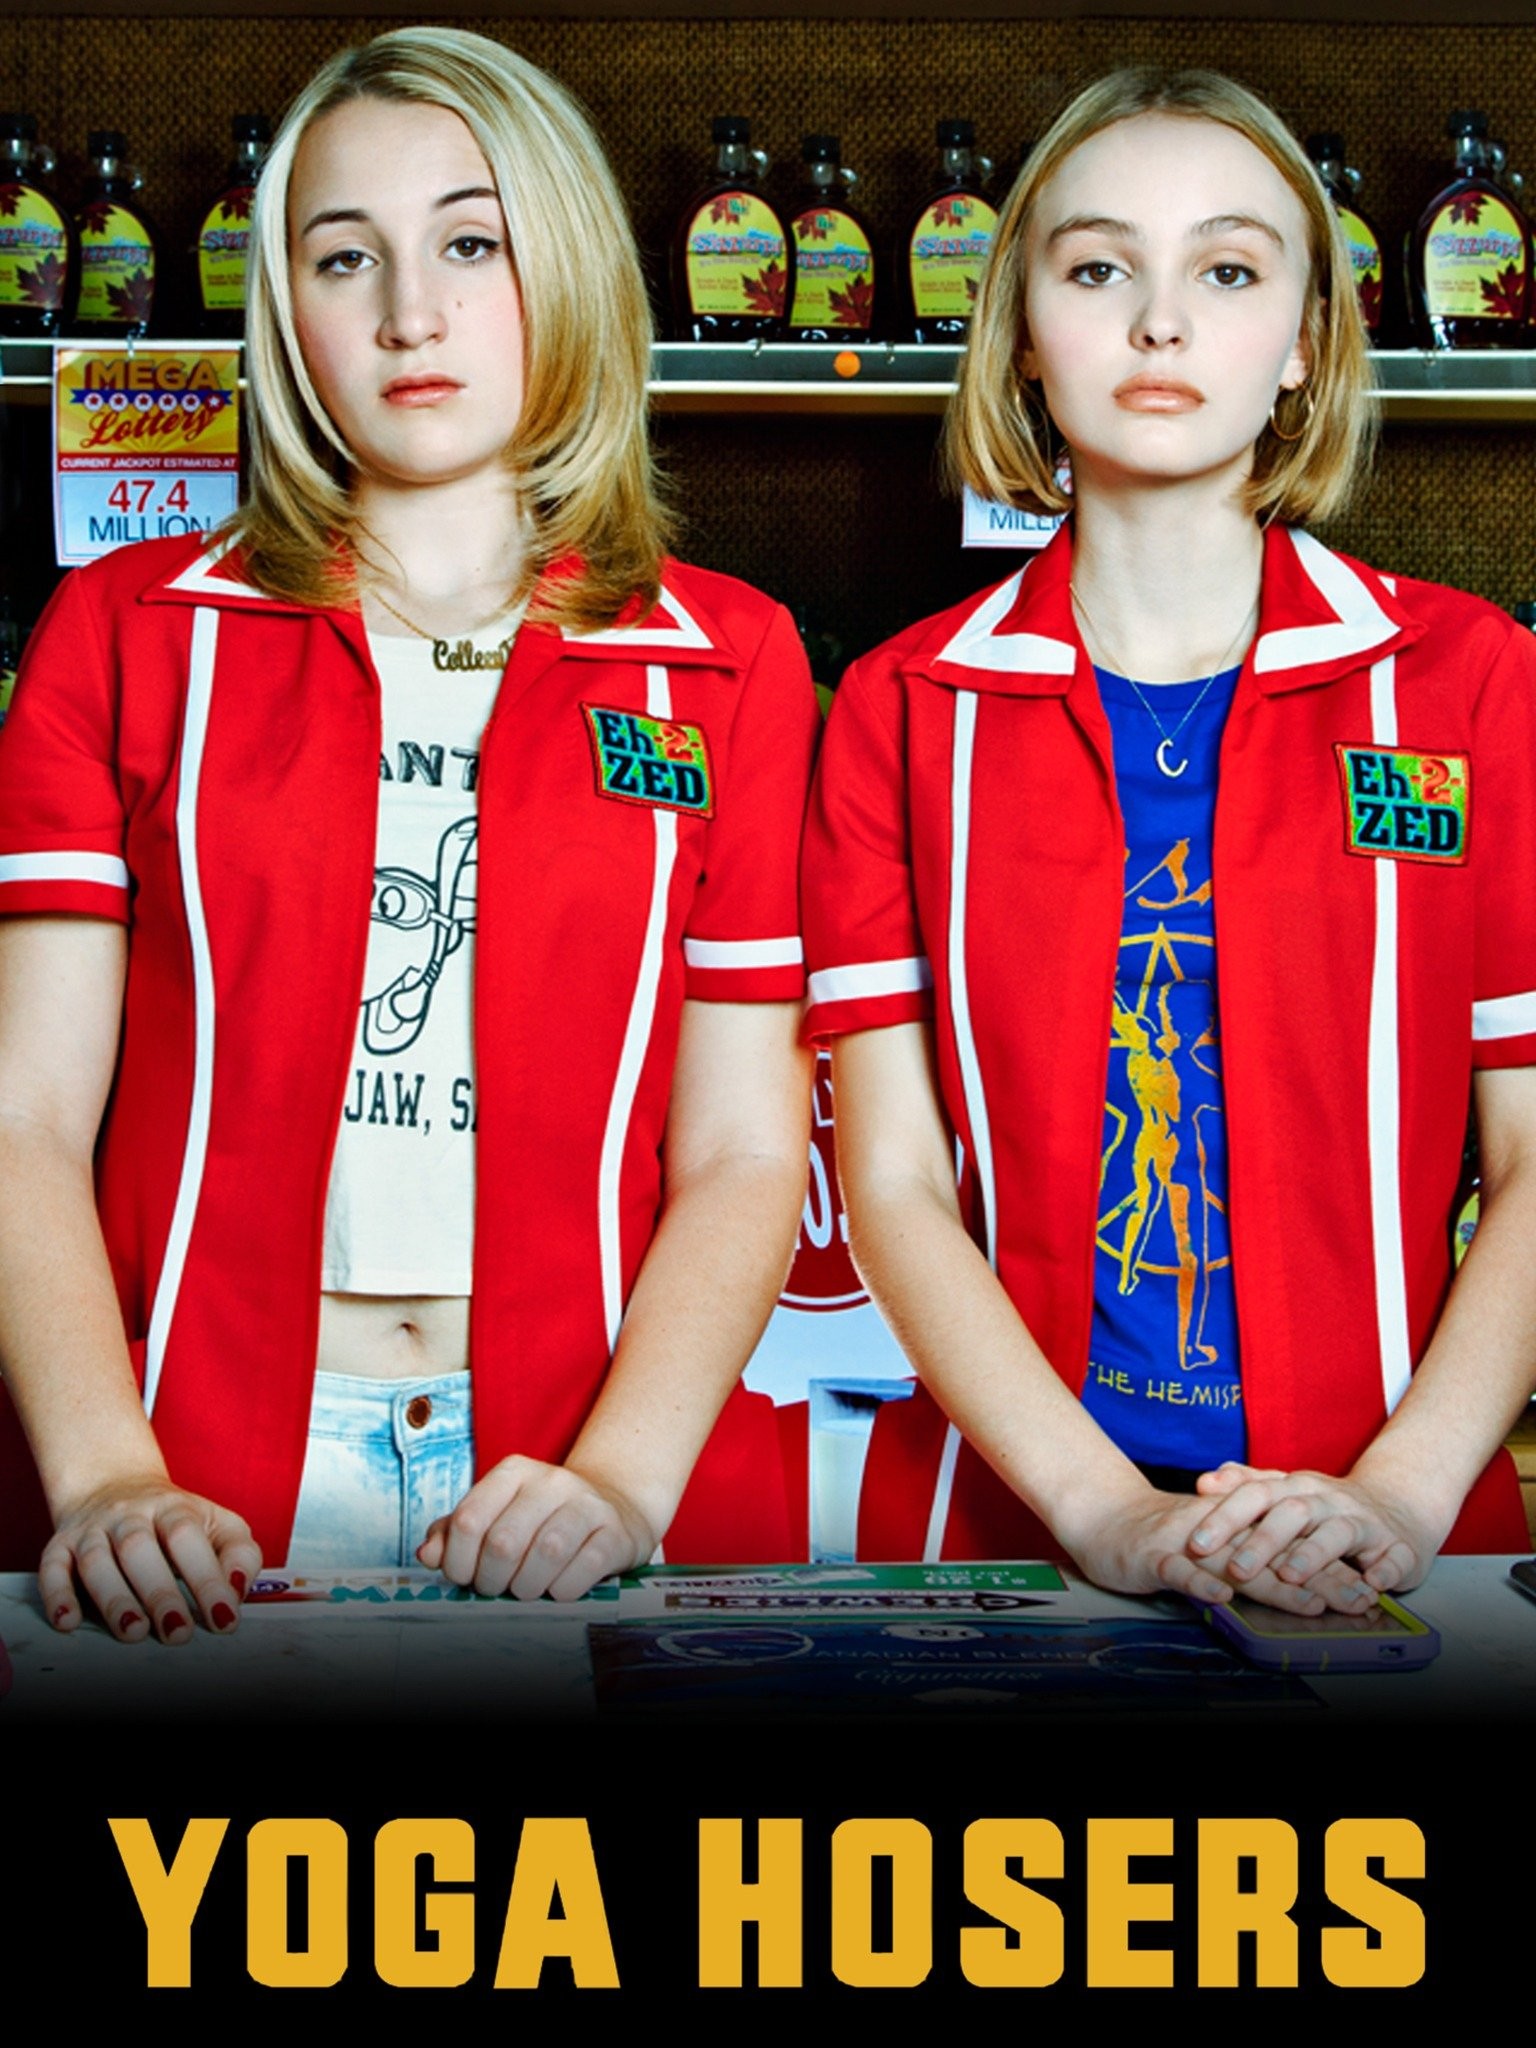 Reviewed: Yoga Hosers is a fun psychedelic teenage romp #NowPlaying  #MovieReview #YogaHosers #Trailer